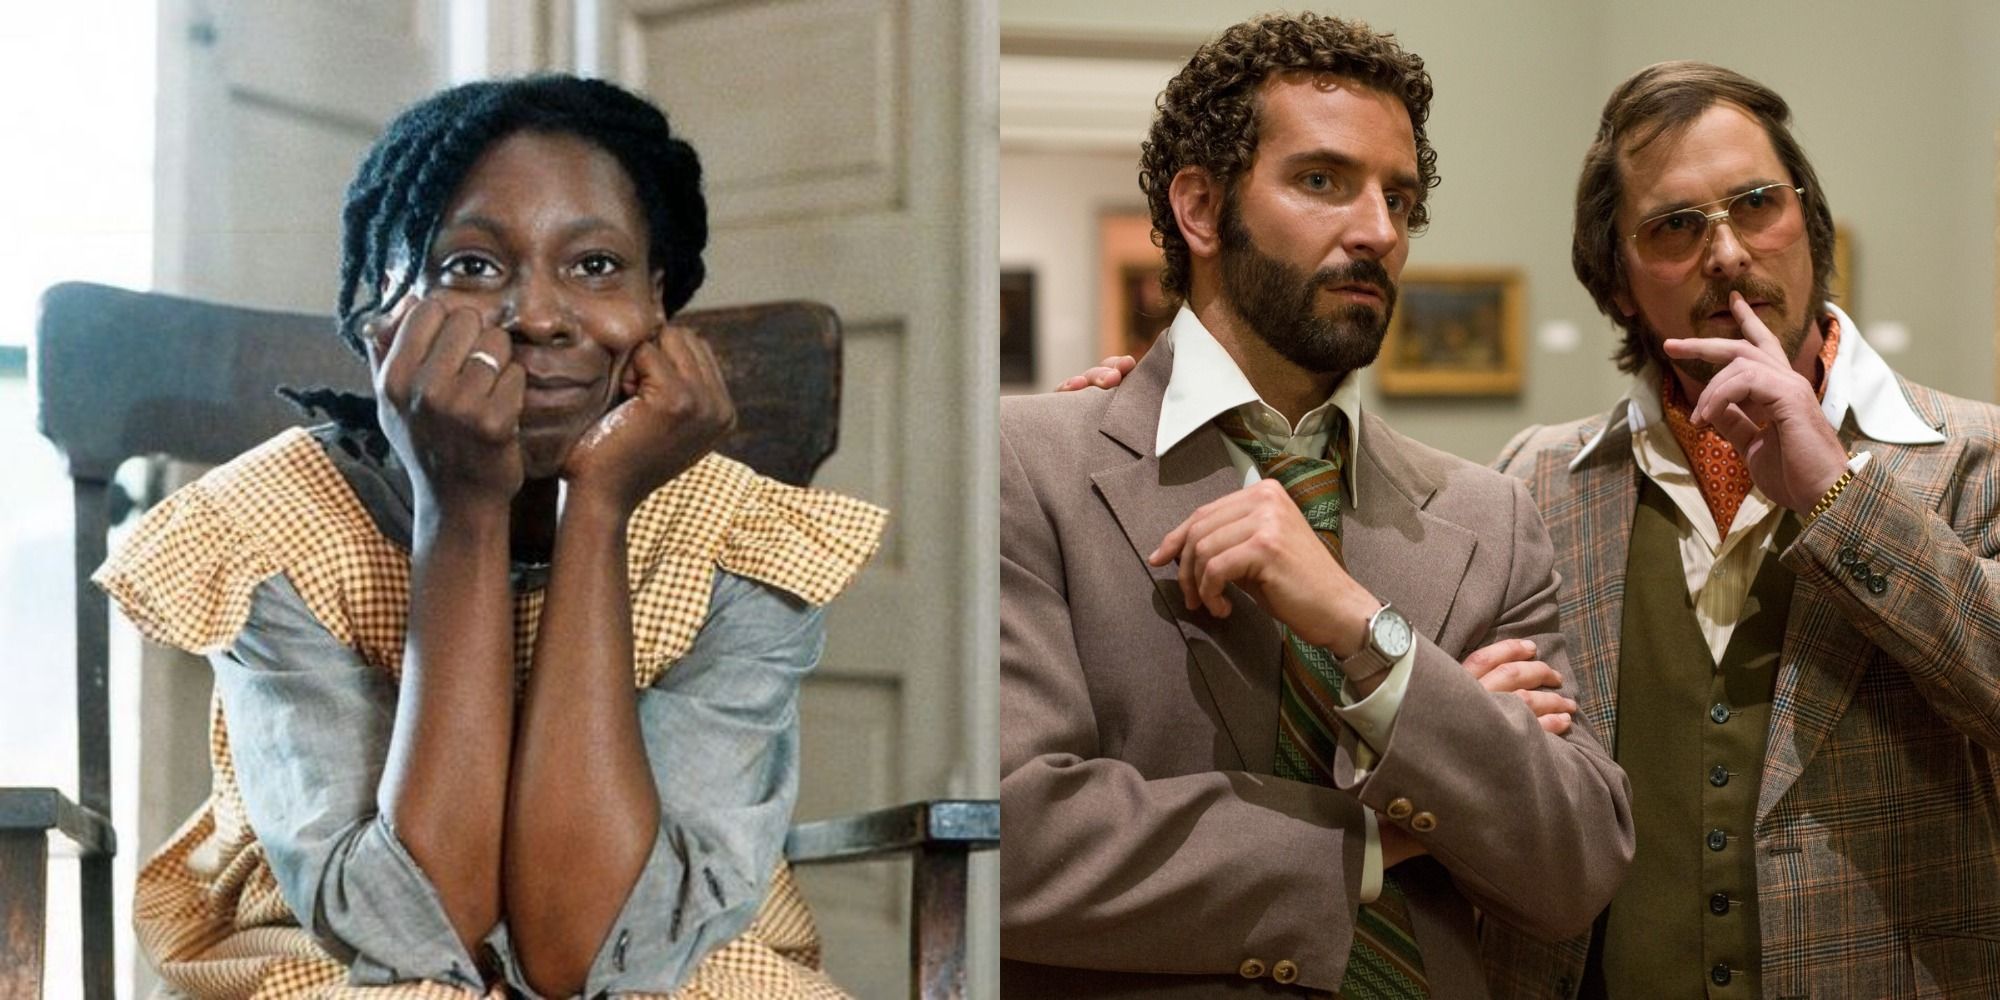 Side-by-side photo of Whoopi Goldberg in The Color Purple and Bradley Cooper and Christian Bale in American Hustle